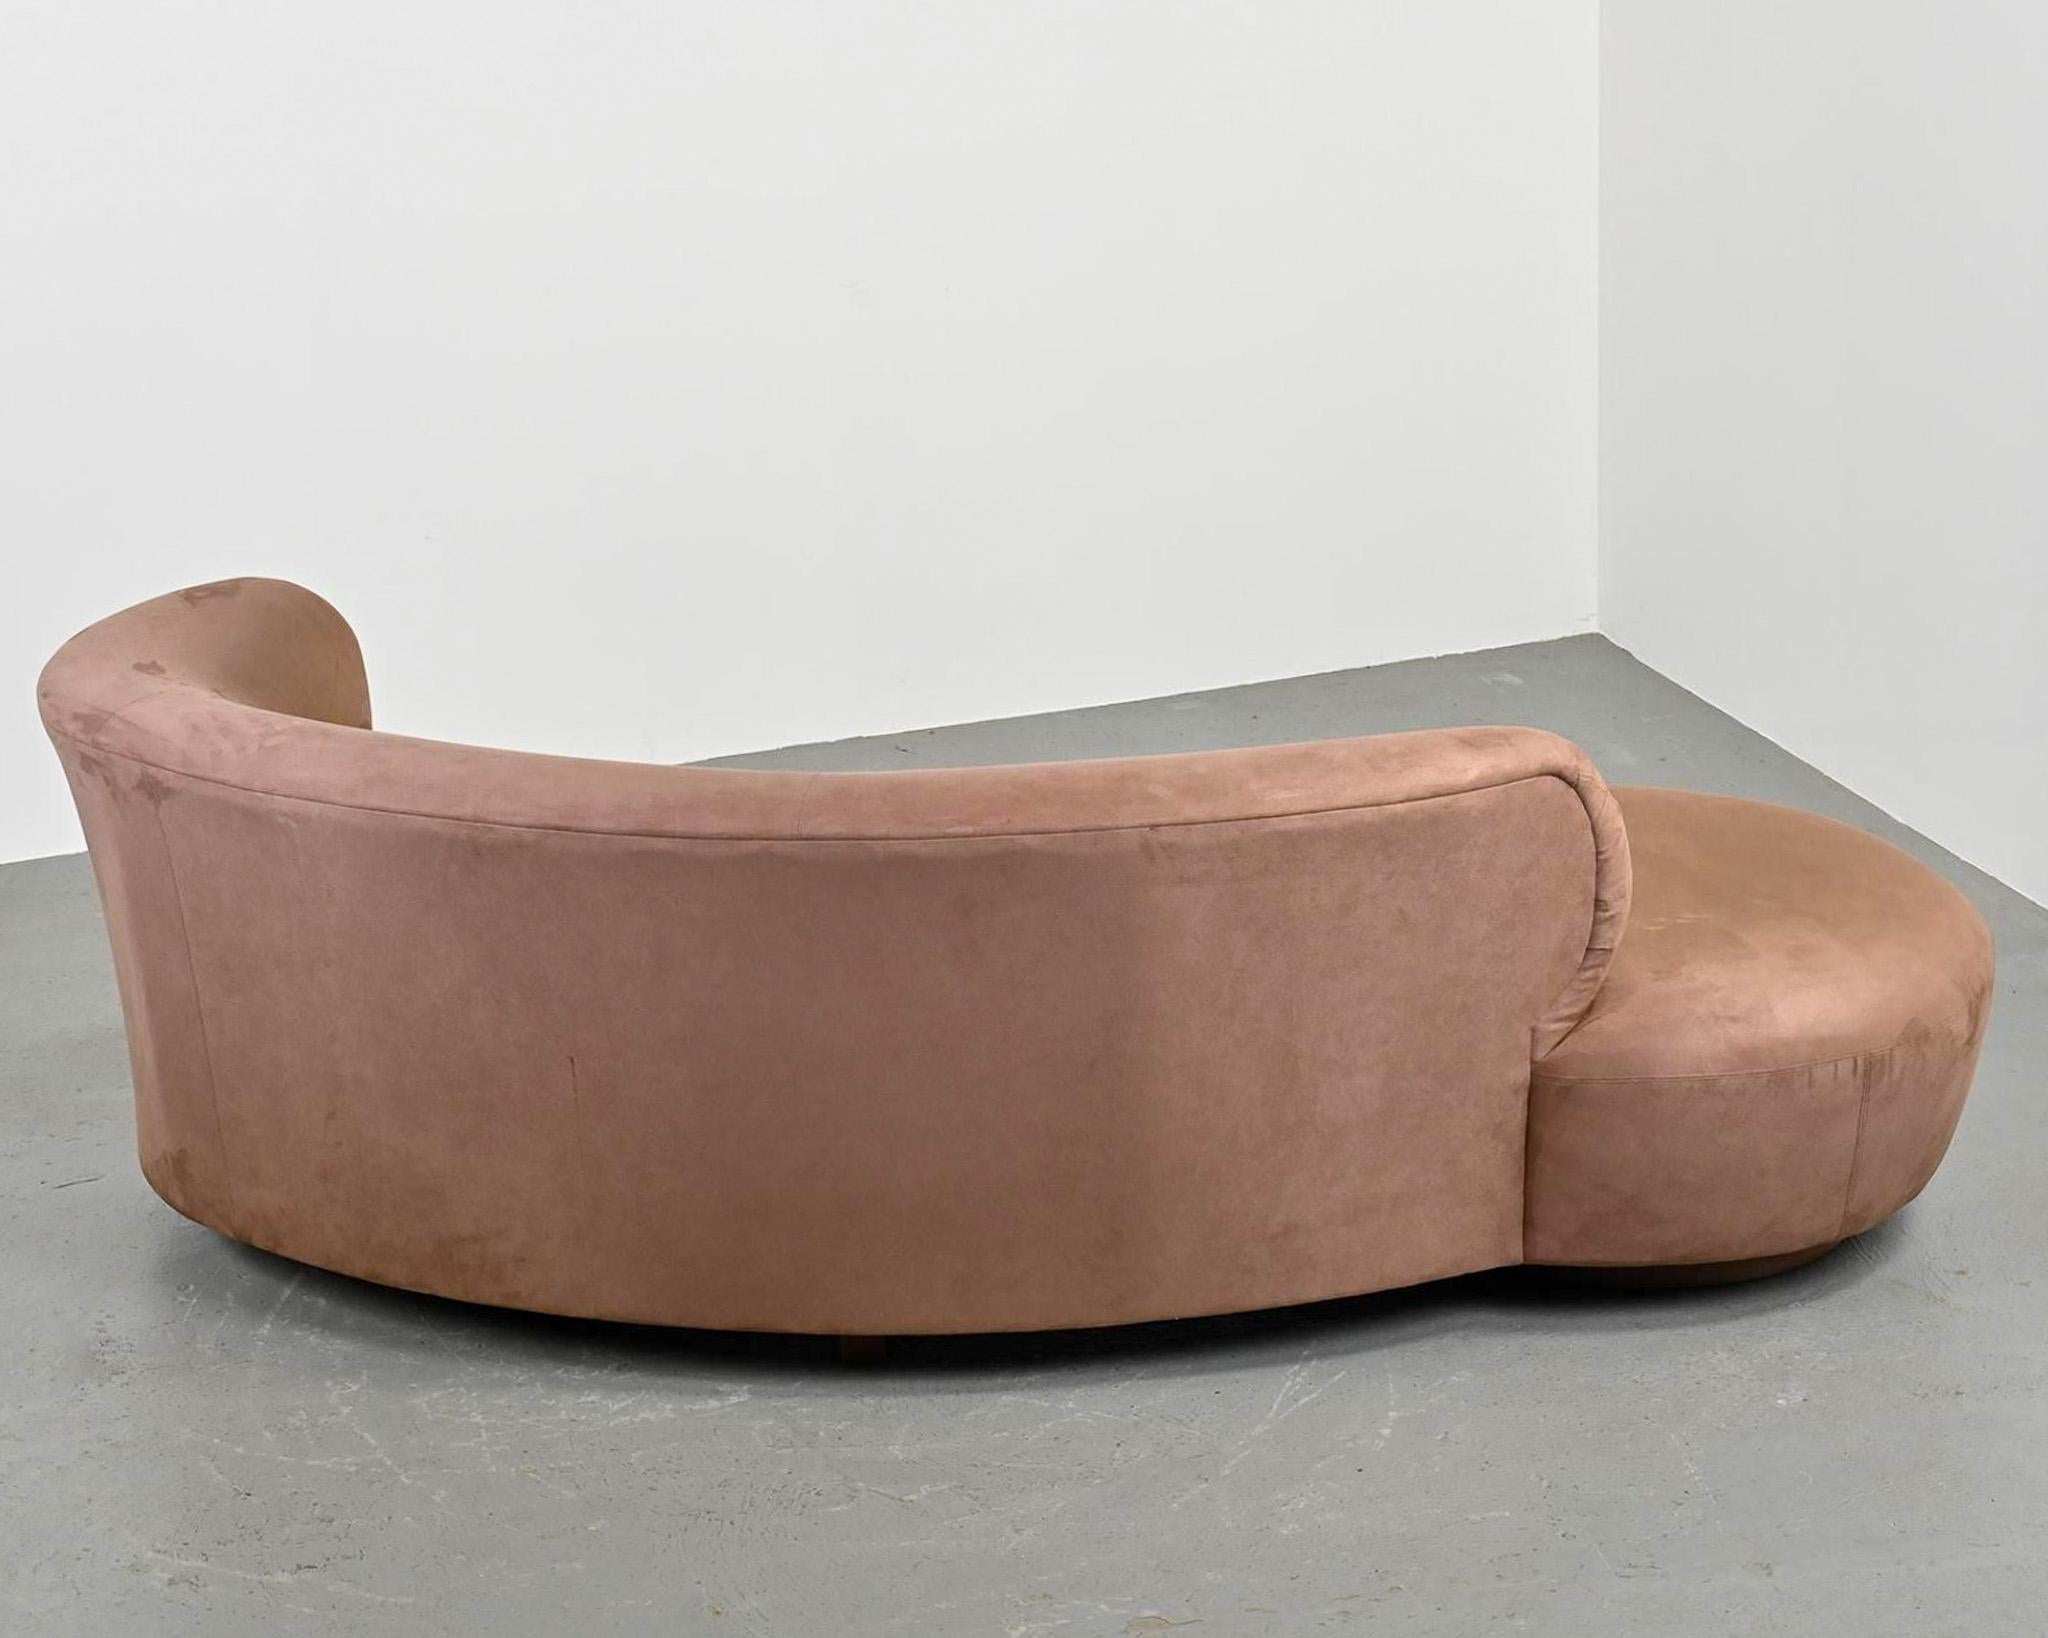 Vladimir Kagan Curved Free Form Styled Sofa in Suede Upholstery, 1990s For Sale 1